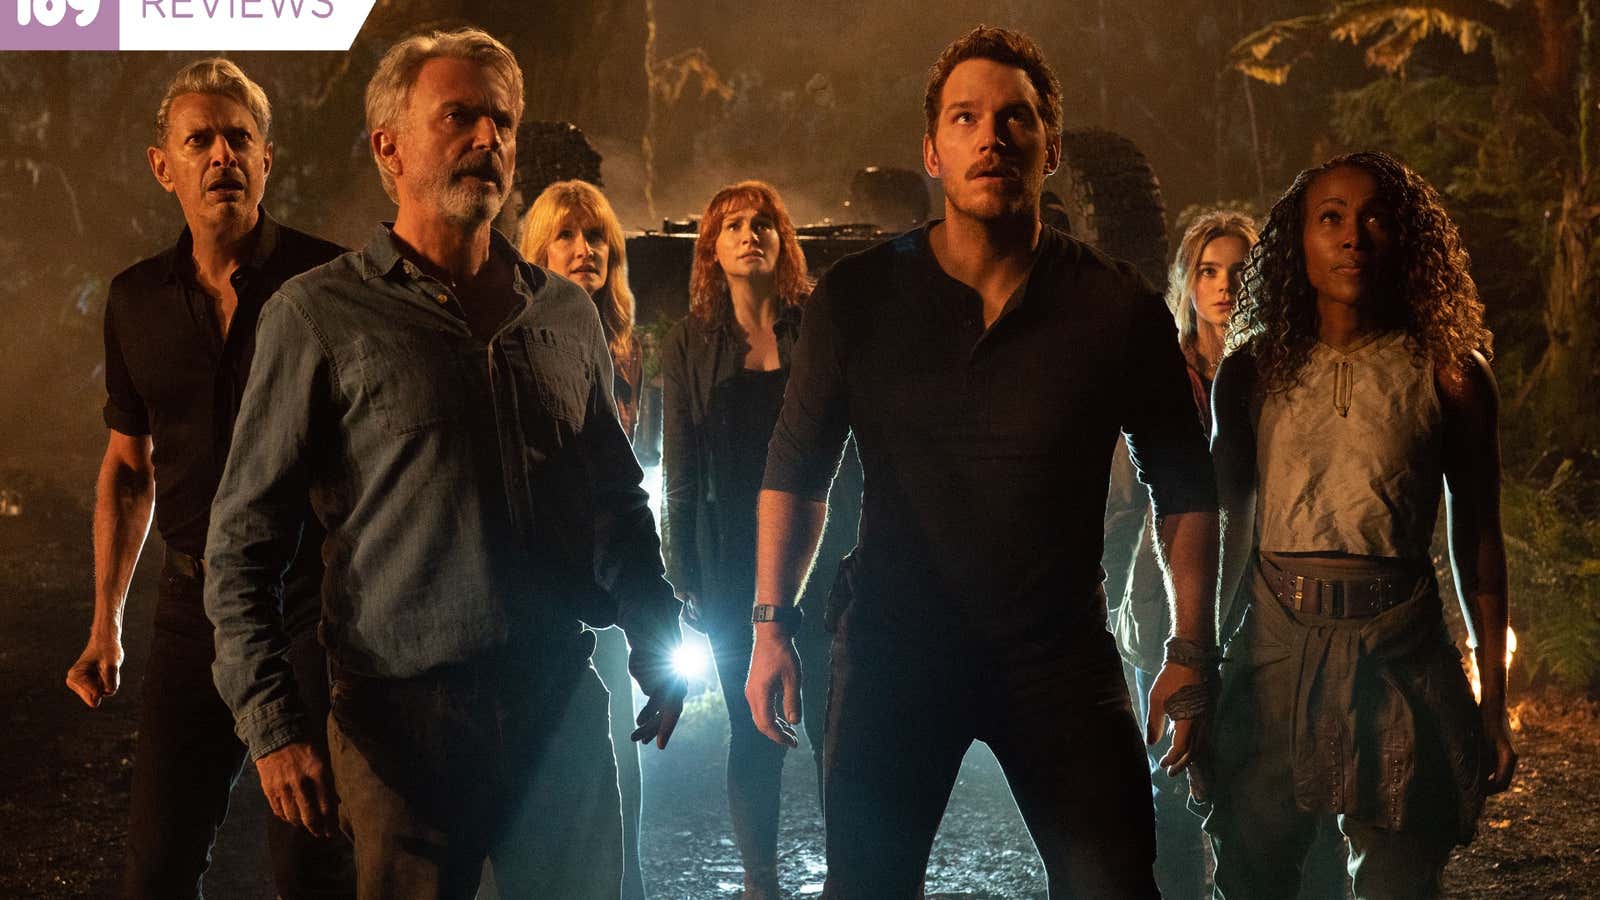 Jurassic World Dominion unites the casts of both franchise with disastrous circumstances